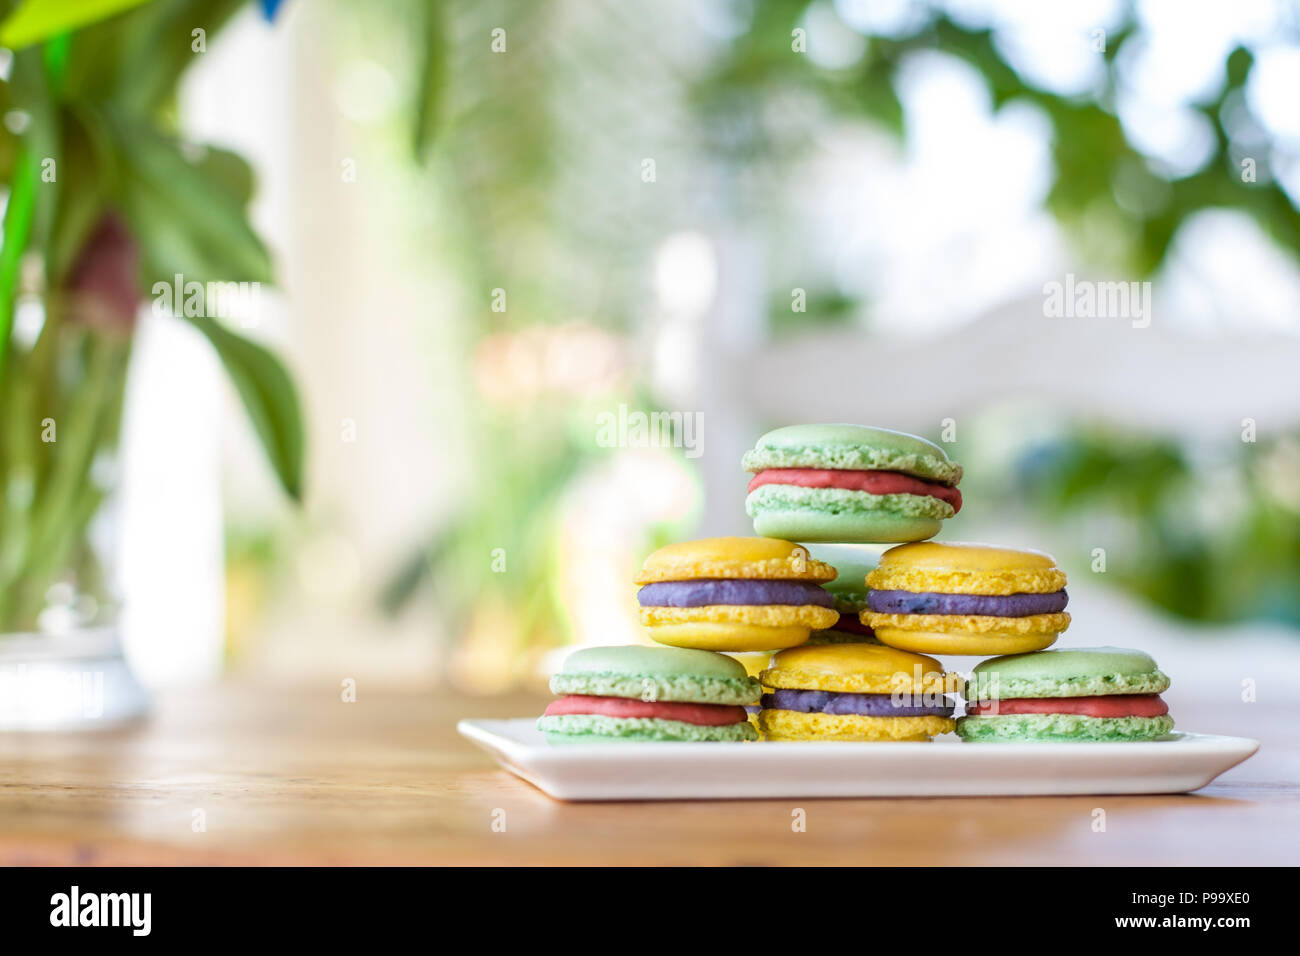 Macarons on a plate on a wooden table with blurry flowers and plants in the background Stock Photo